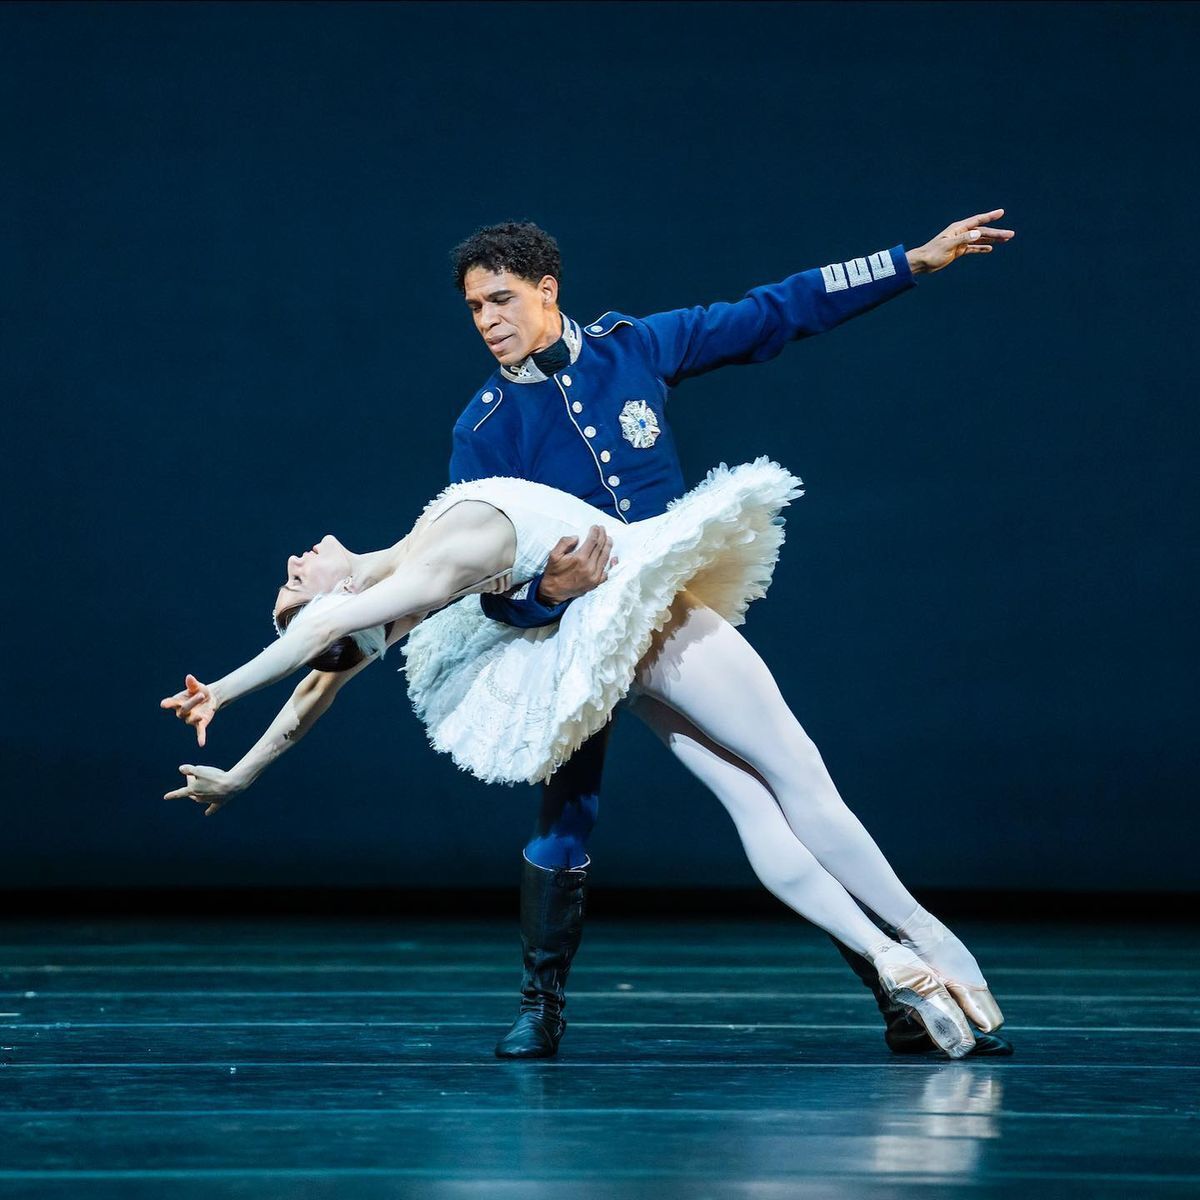 <p>Fancy seeing some of the world’s best ballet? The <a href="https://www.brb.org.uk/whats-on">Birmingham Royal Ballet</a> has got you covered. The company launched in the Second City back in 1990 and has been delighting audiences ever since. Guided by the genius director, Carlos Acosta, it hosts regular performances throughout the year.</p>